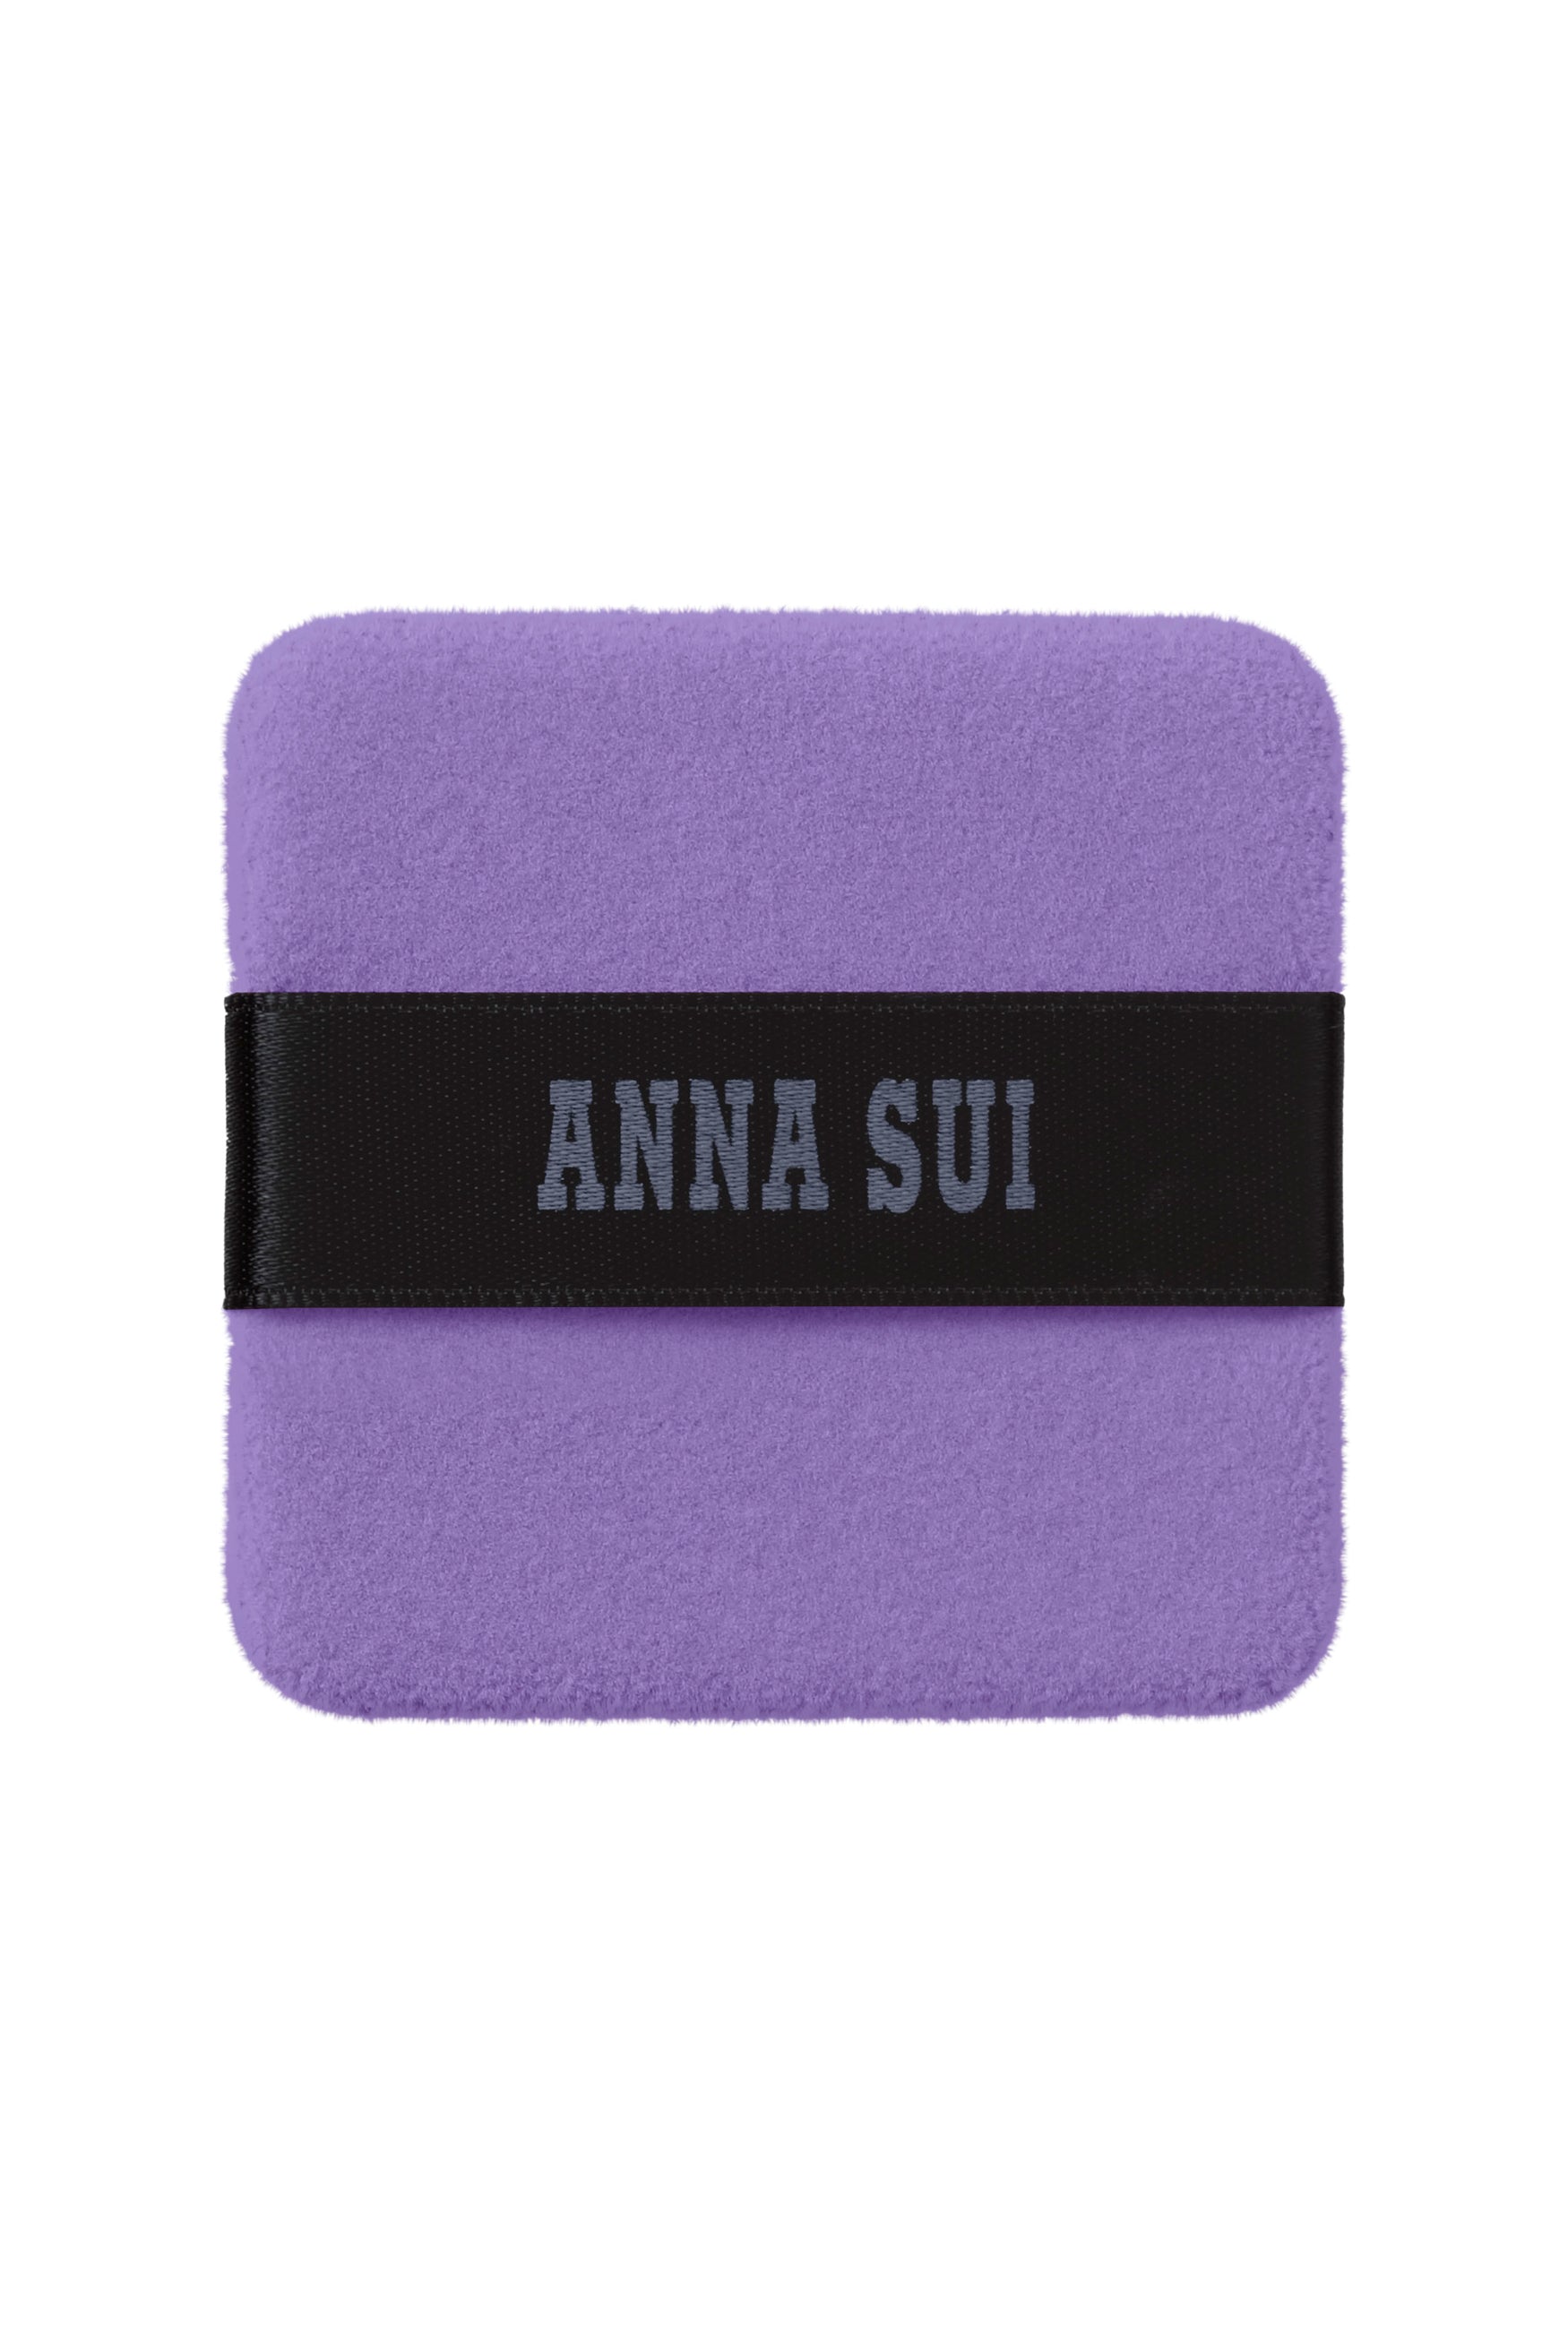 Anna Sui Mini Puff is perfect for applying Face Powder, violet with a black ribbon